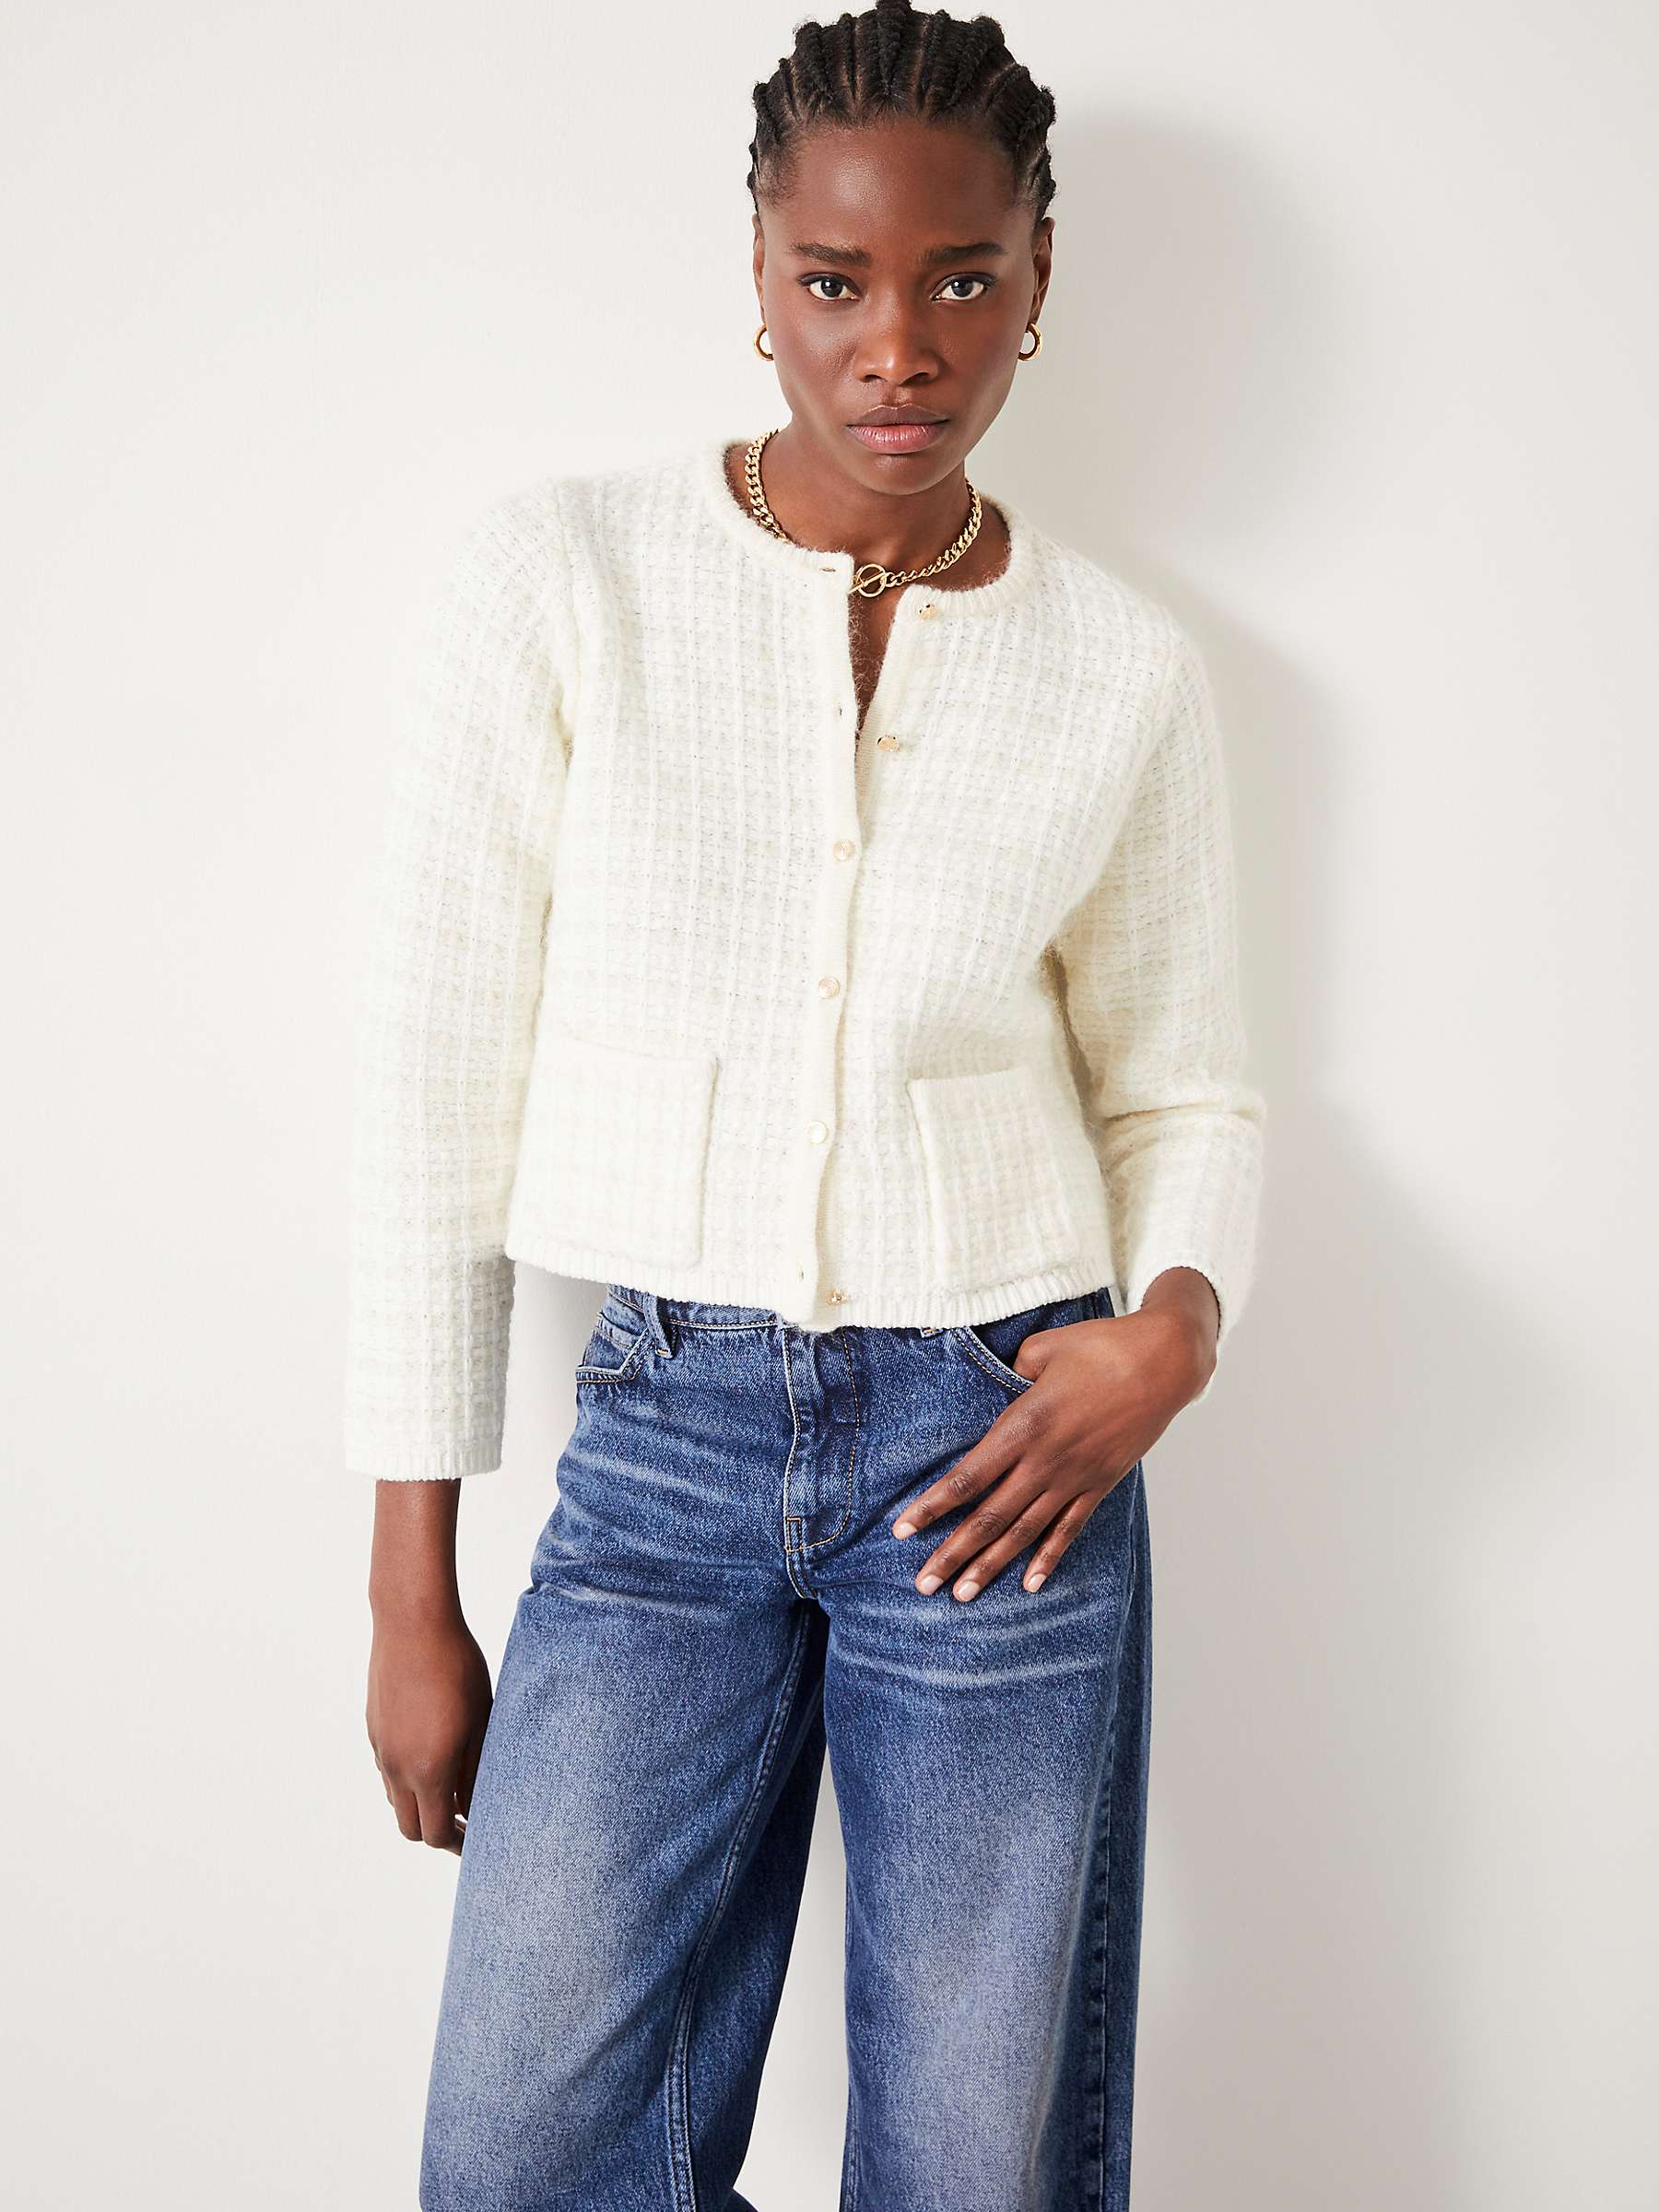 Buy HUSH Bettie Knitted Jacket, Soft White Online at johnlewis.com